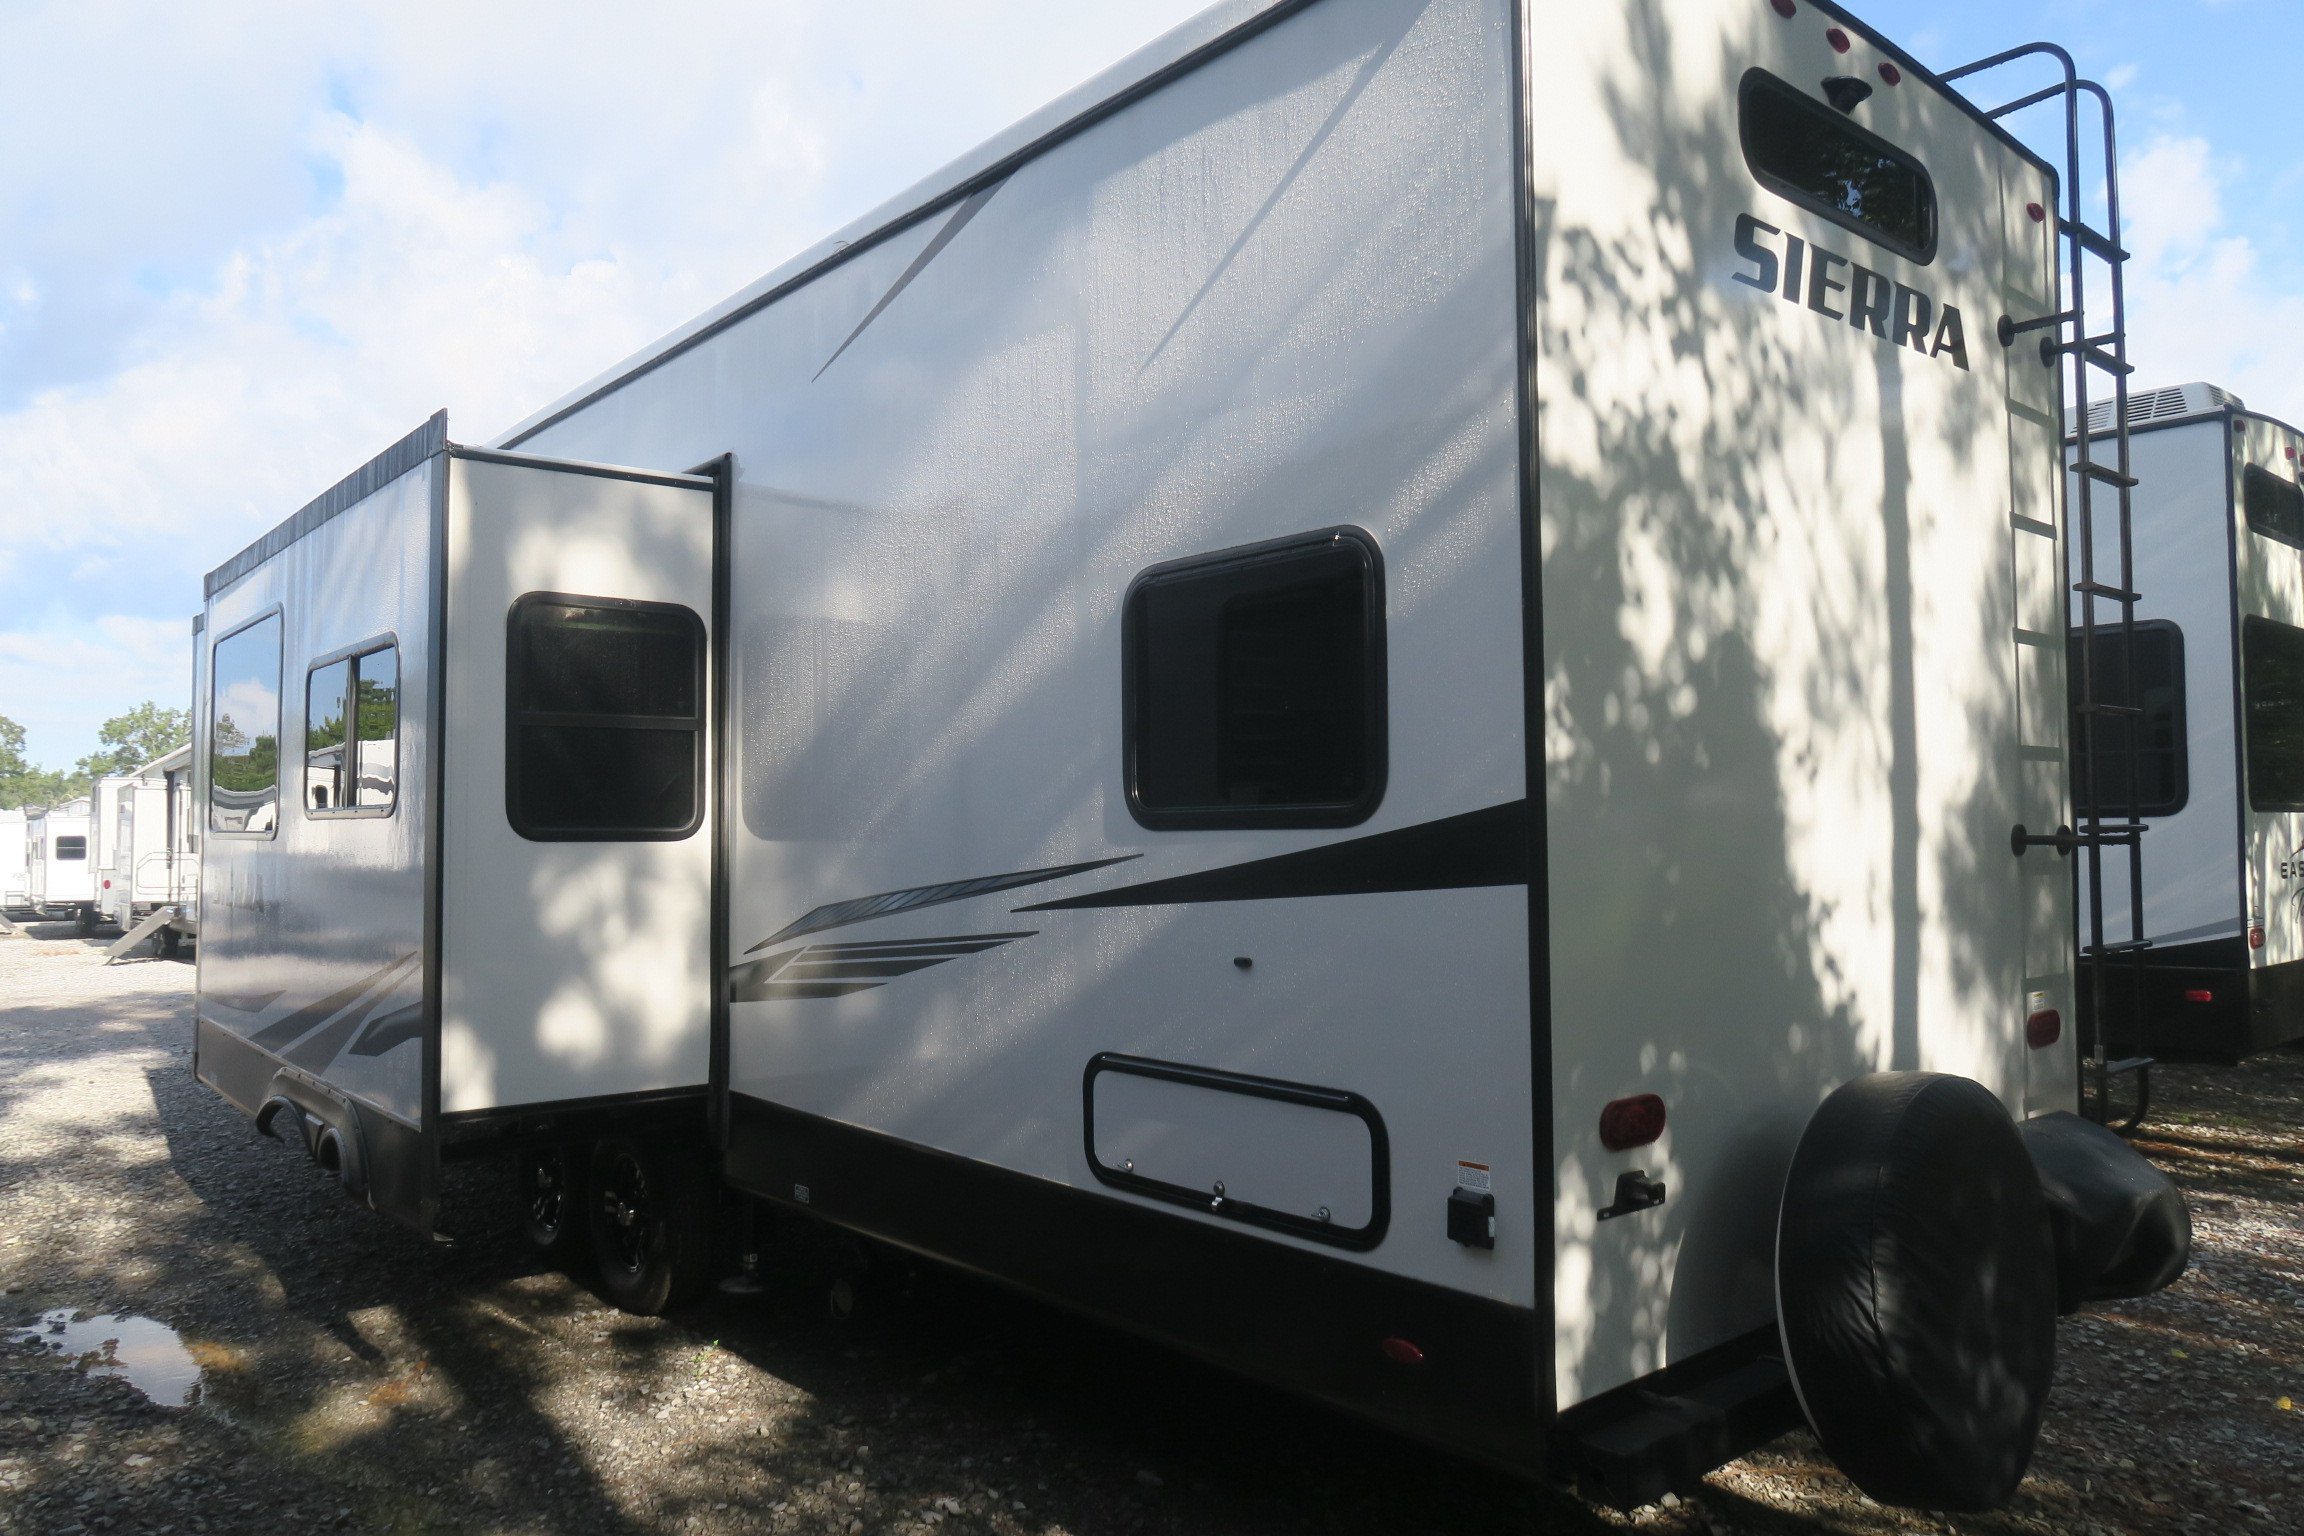 NEW 2022 SIERRA 3440BH Overview Berryland Campers